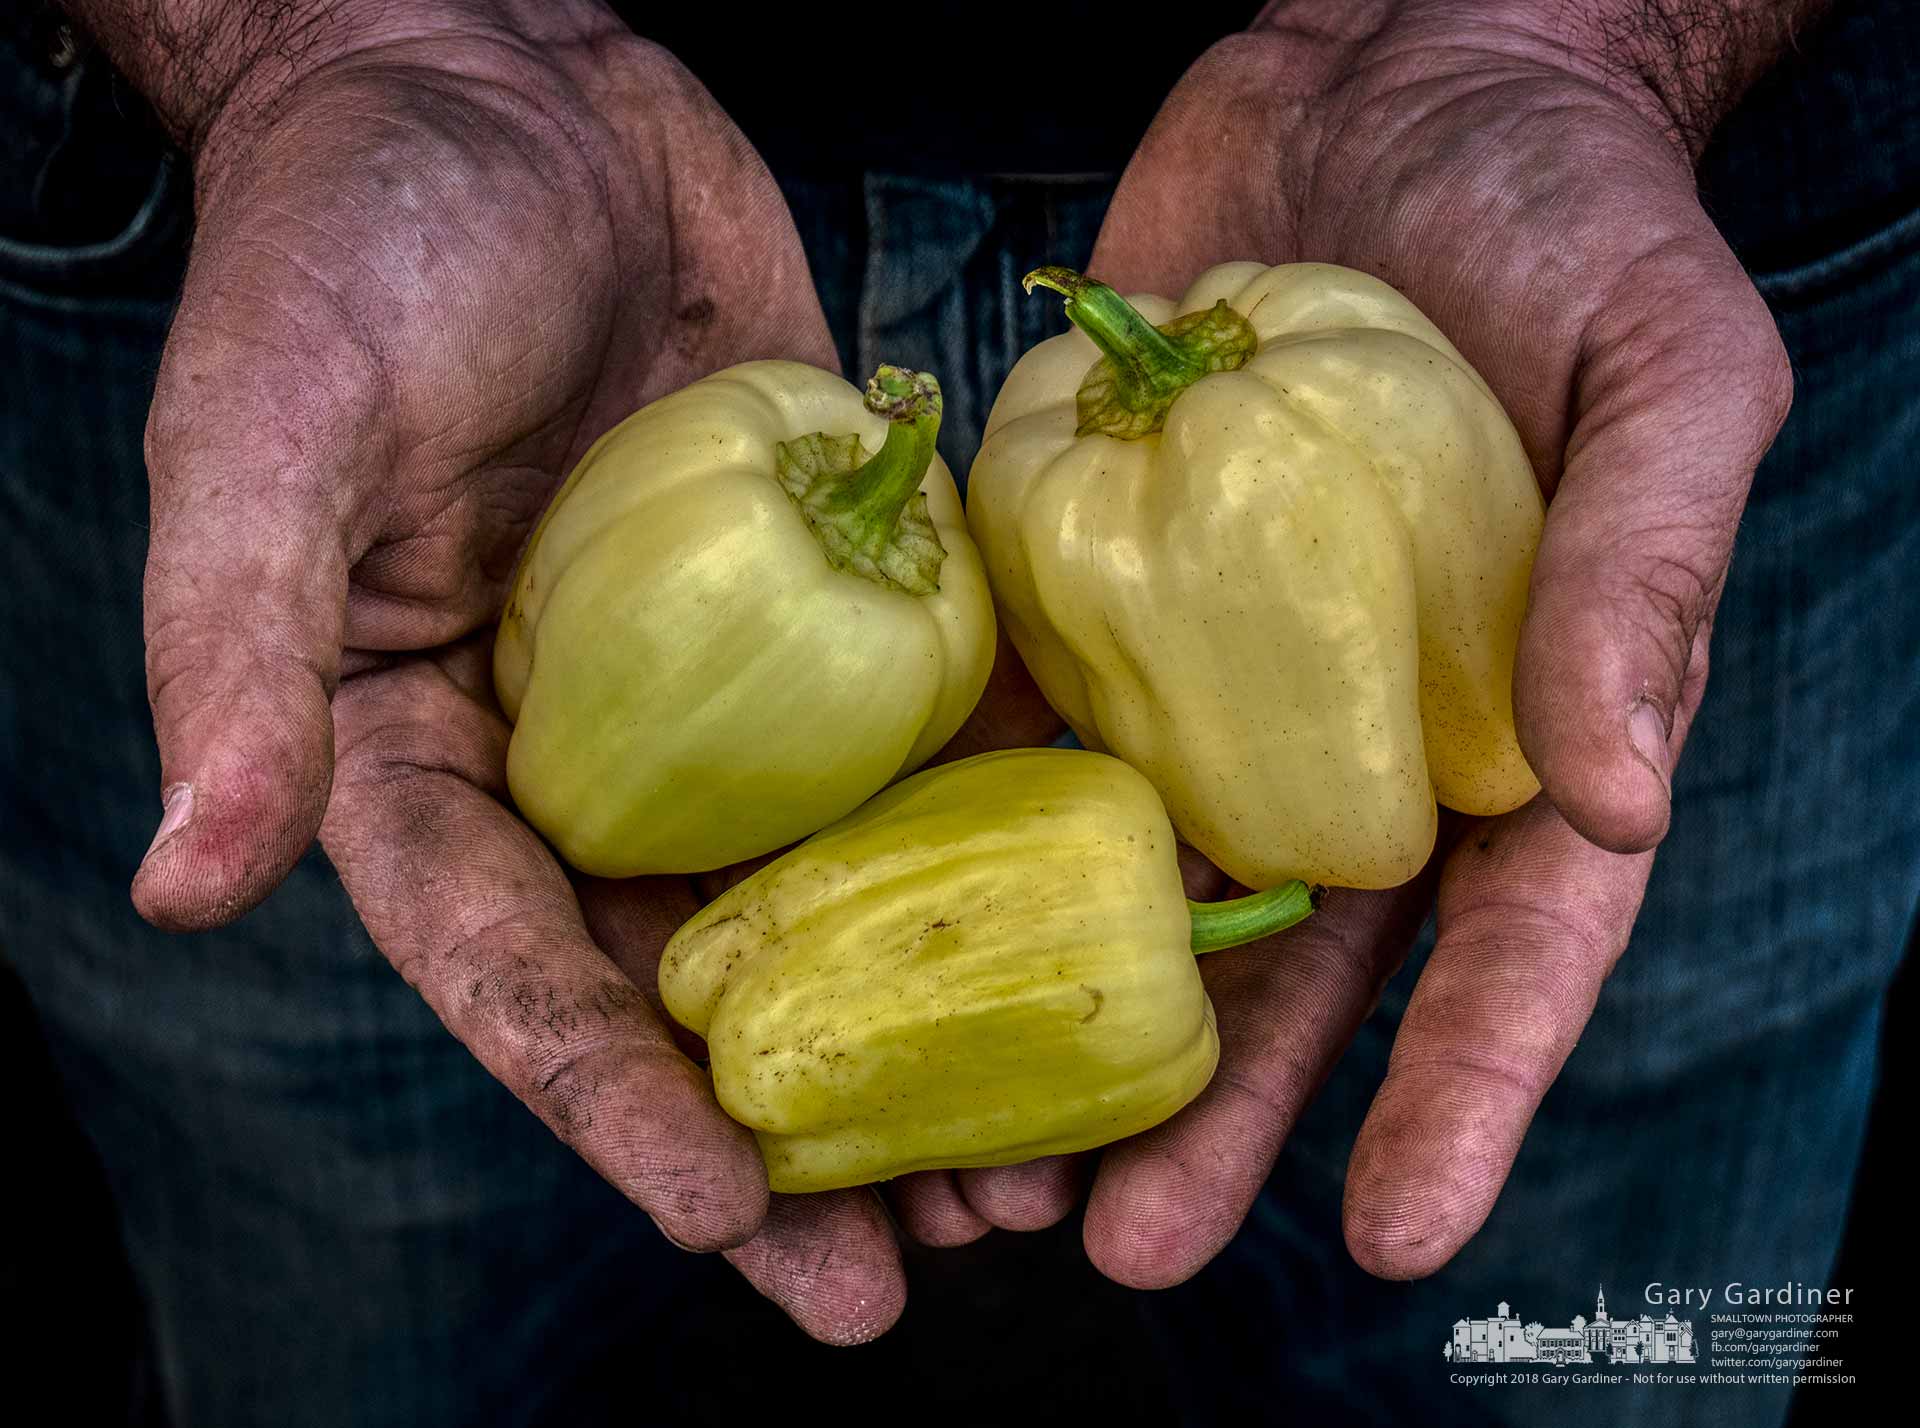 Lee Bird of Bird's Haven Farm holds three of the yellow peppers he offered for sale at the Wednesday Market in Uptown Westerville. My Final Photo for Oct. 17, 2018.